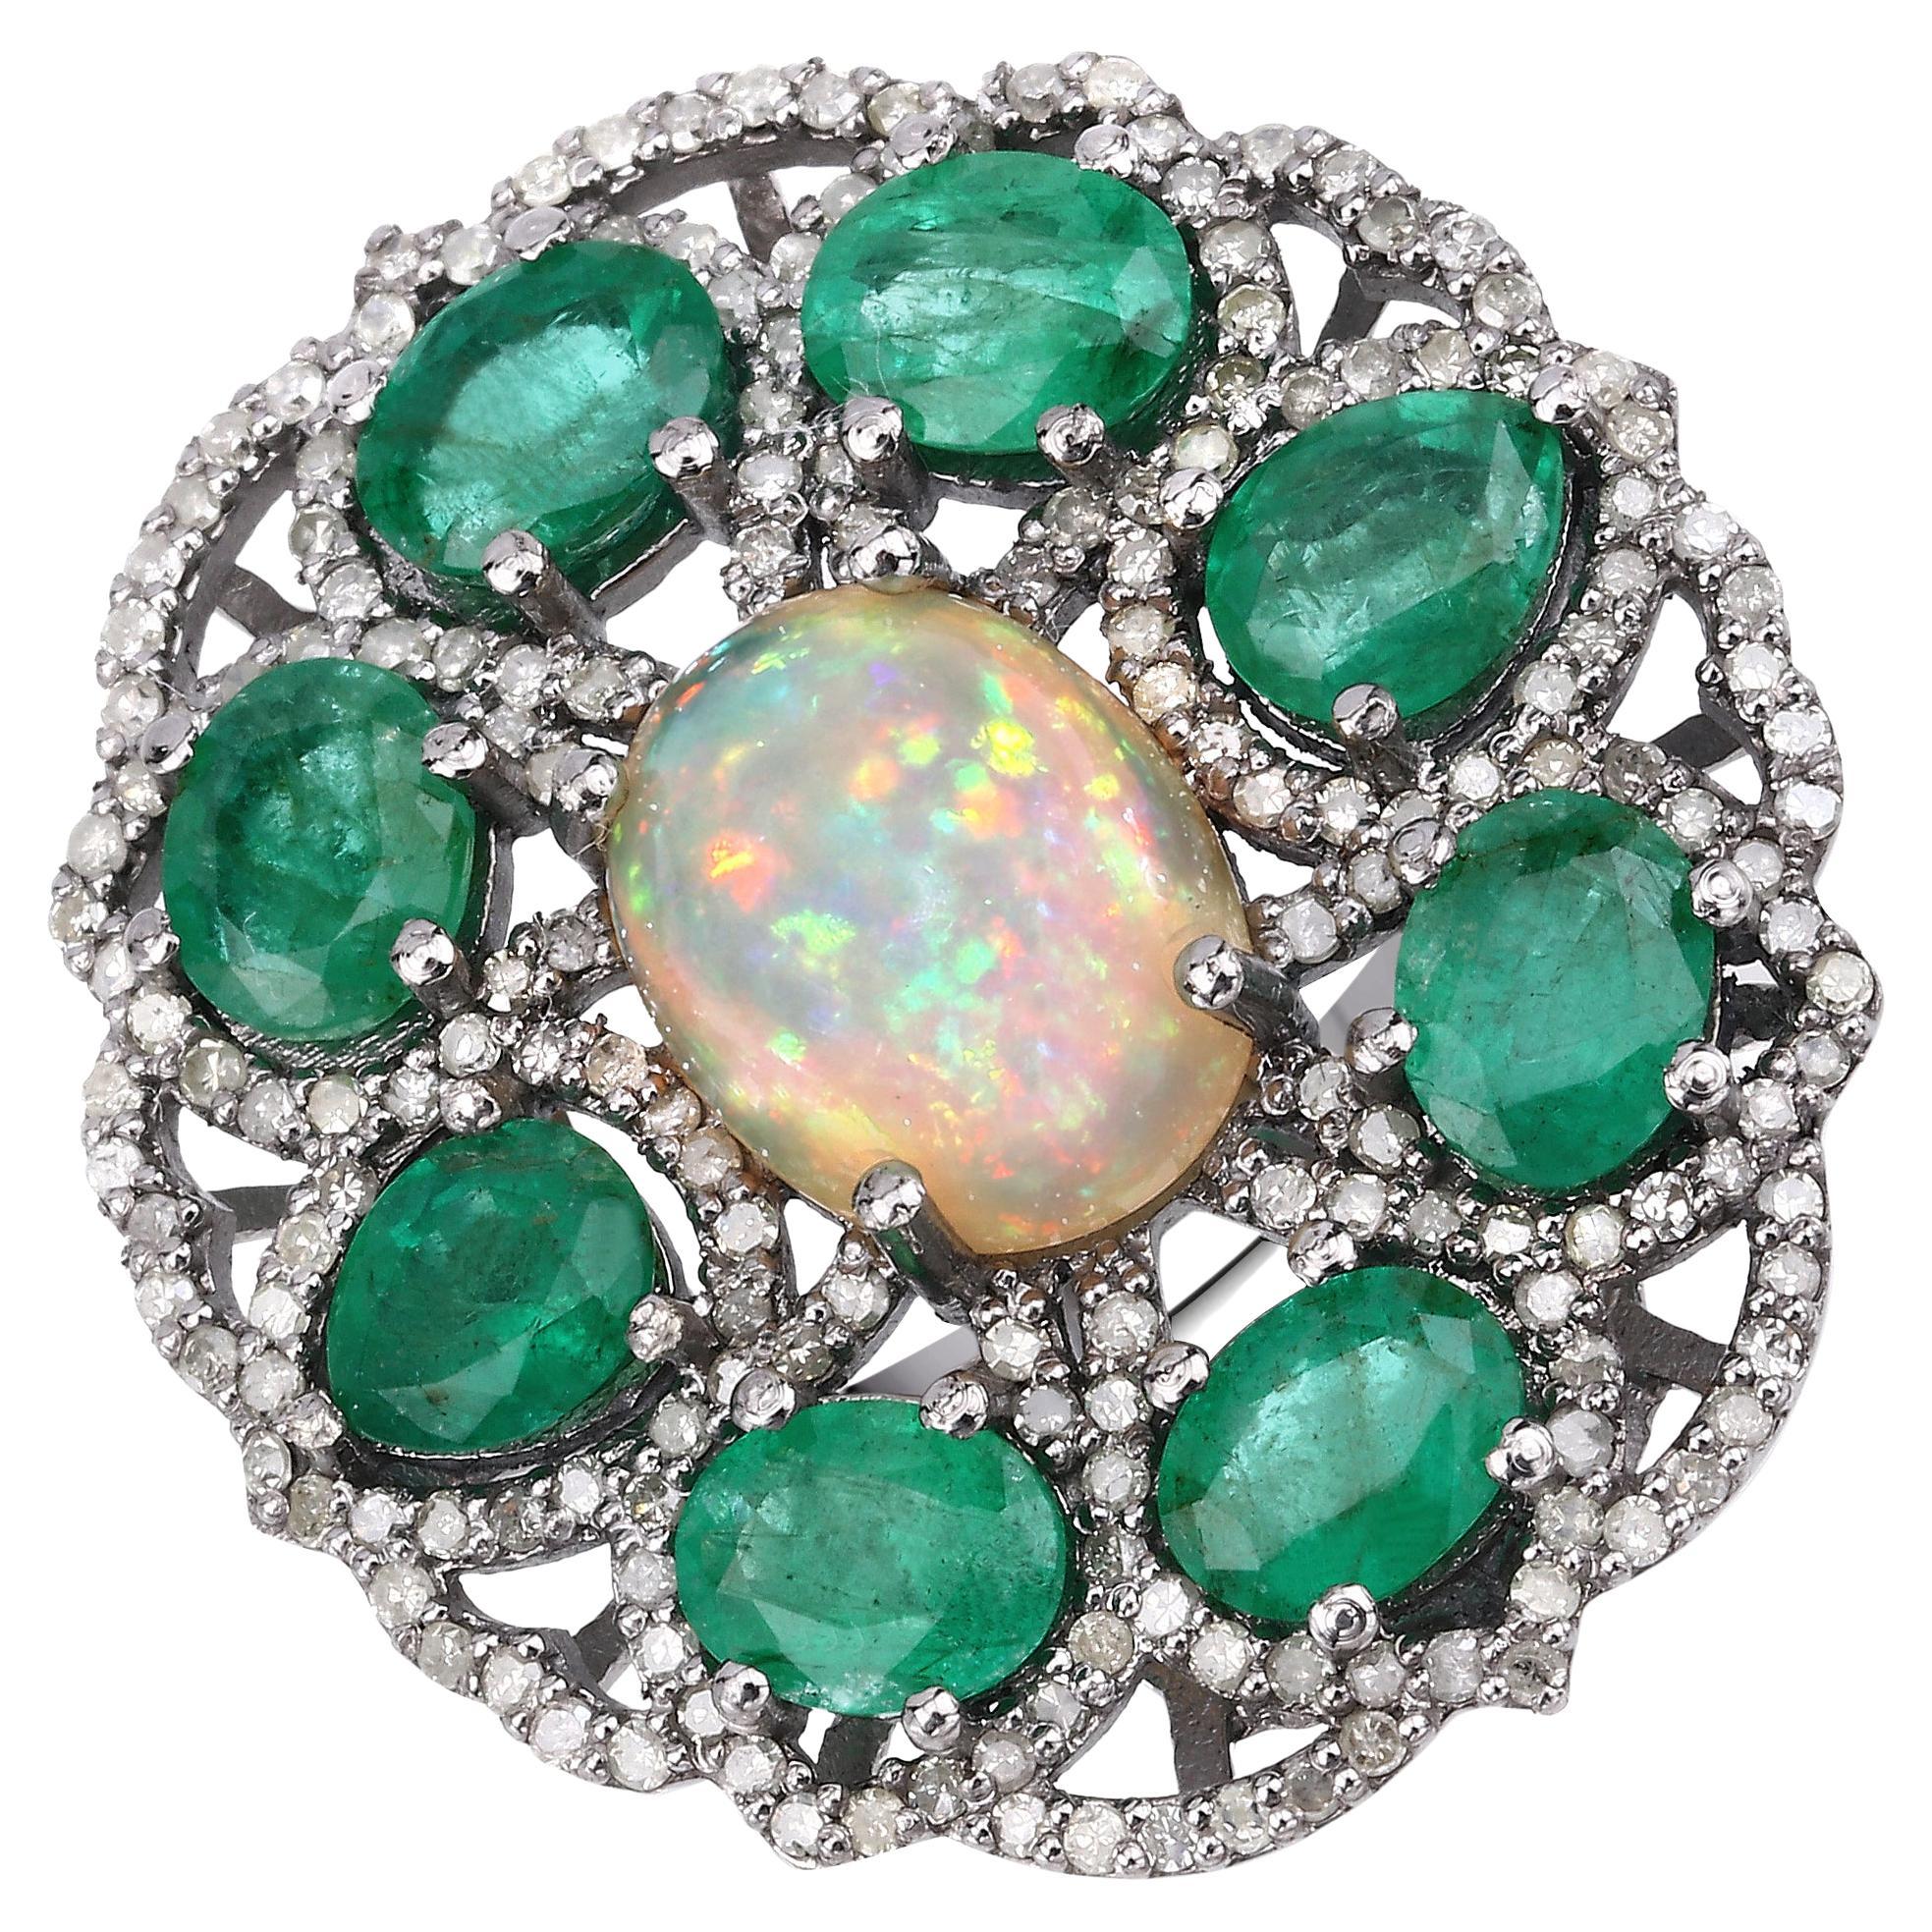 9.80cttw Ethiopian Opal, Emerald with Diamonds 1.31cttw Sterling Silver Ring For Sale